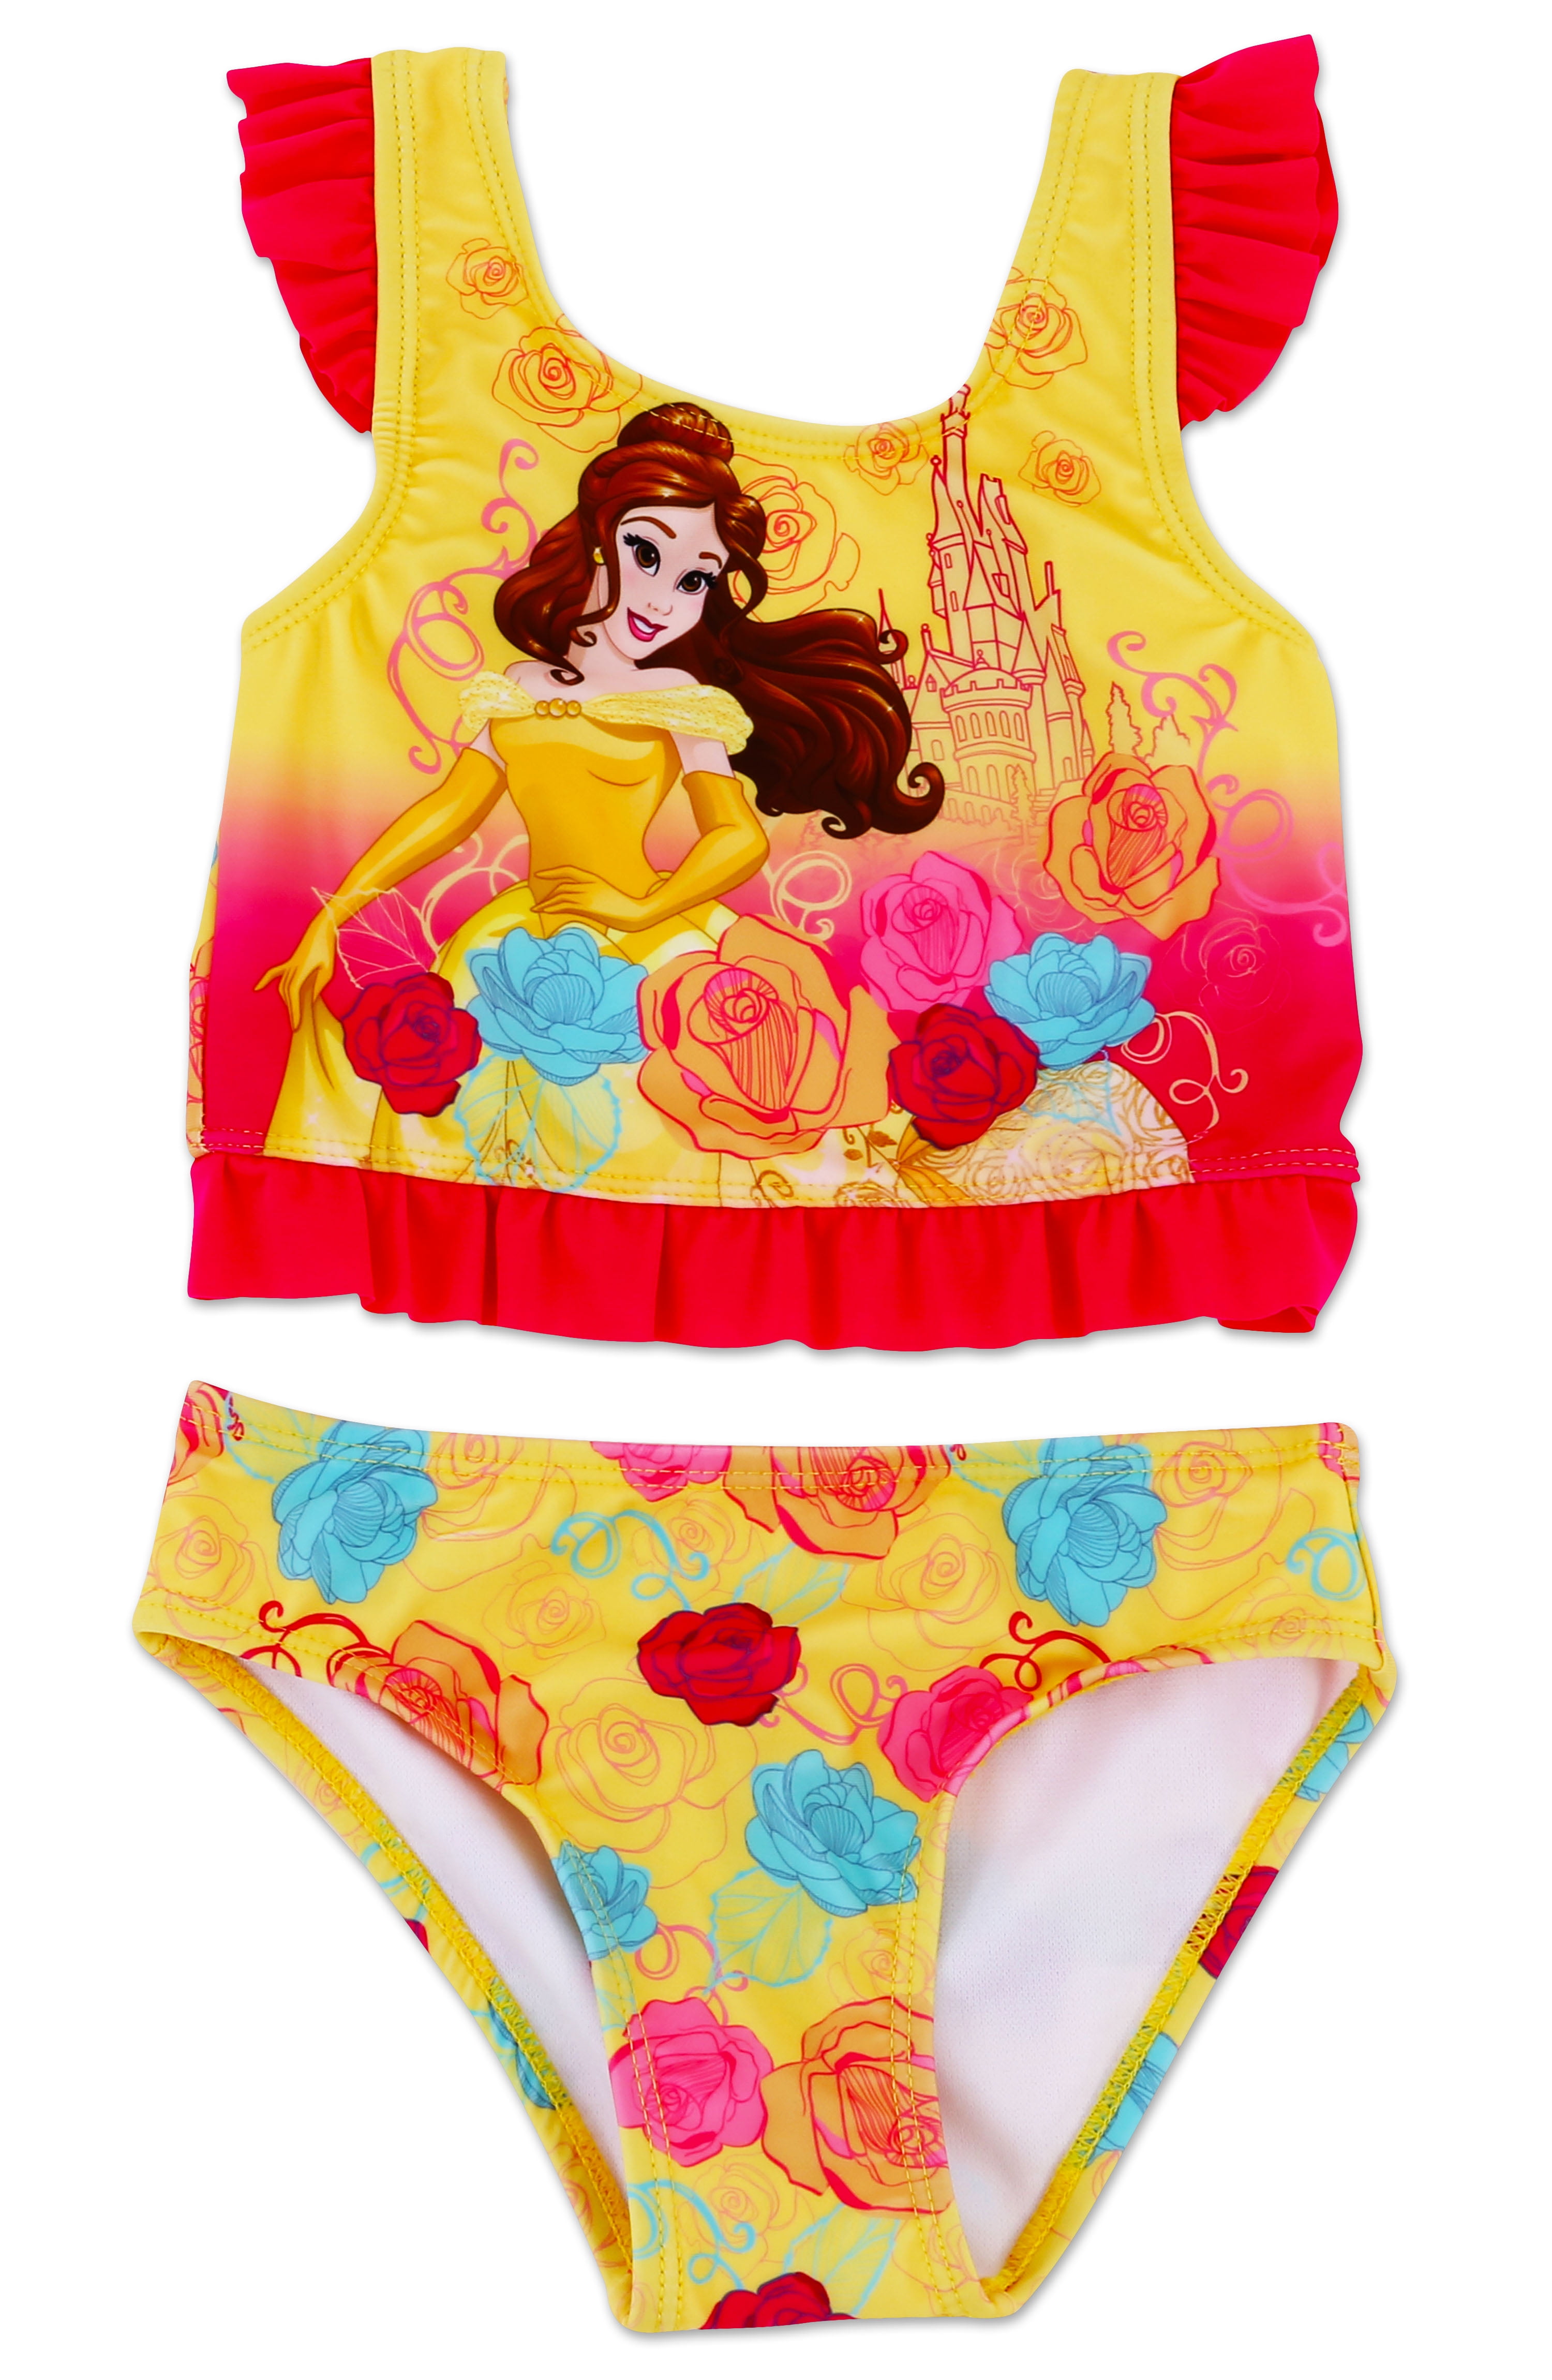 NWT Disney Store Princess Belle Swimsuit Beauty and The Beast UPF 50 Girls 